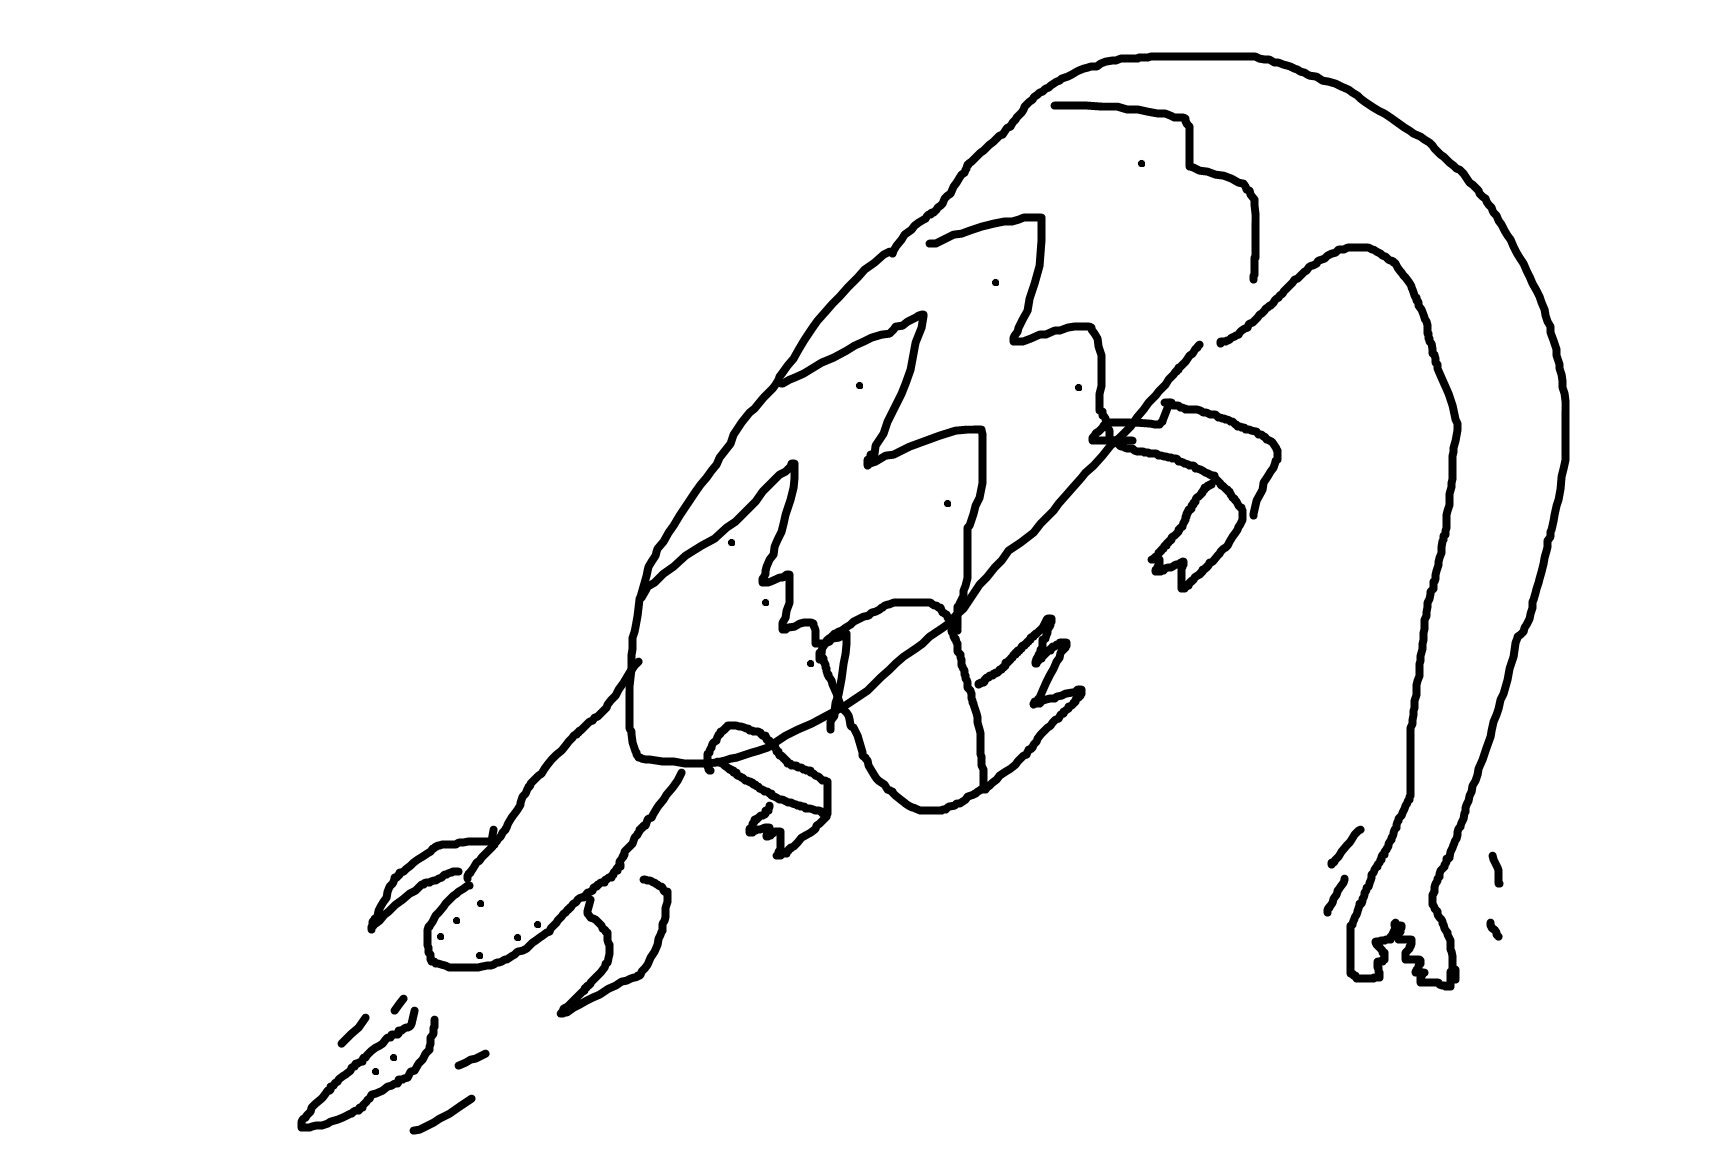 guess the creature by my bad drawing 17!!!!!!!!!!!!!!!! Fandom